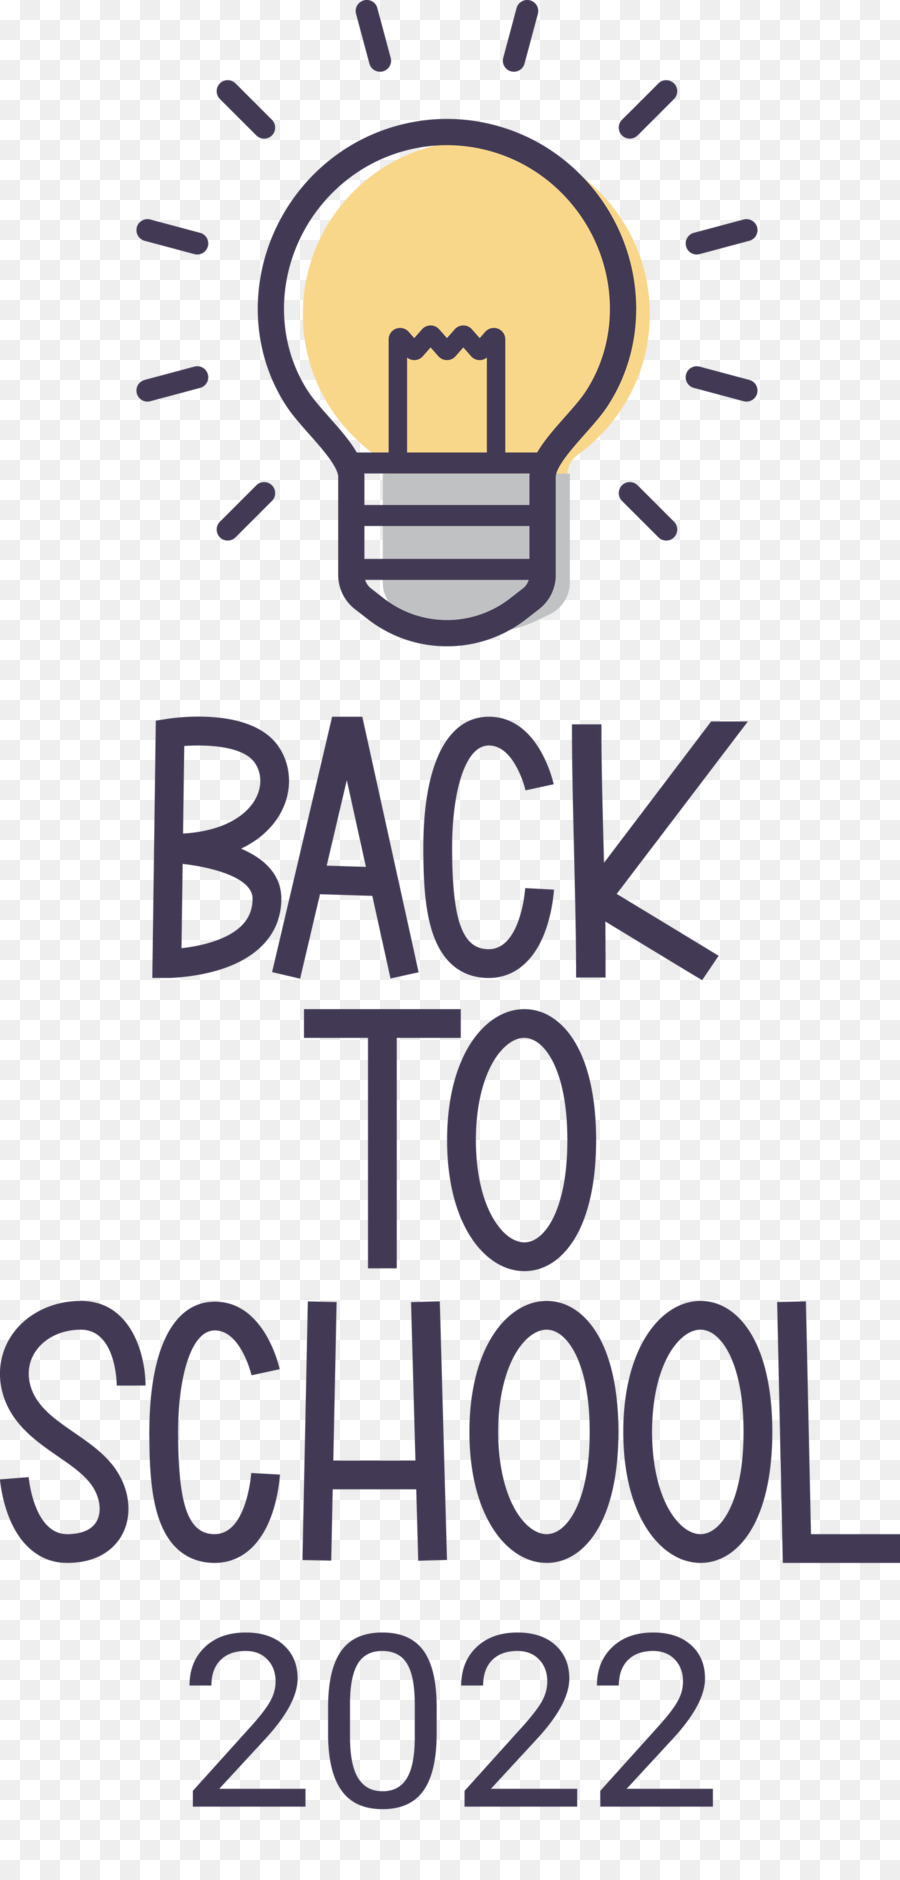 Back to school 2022